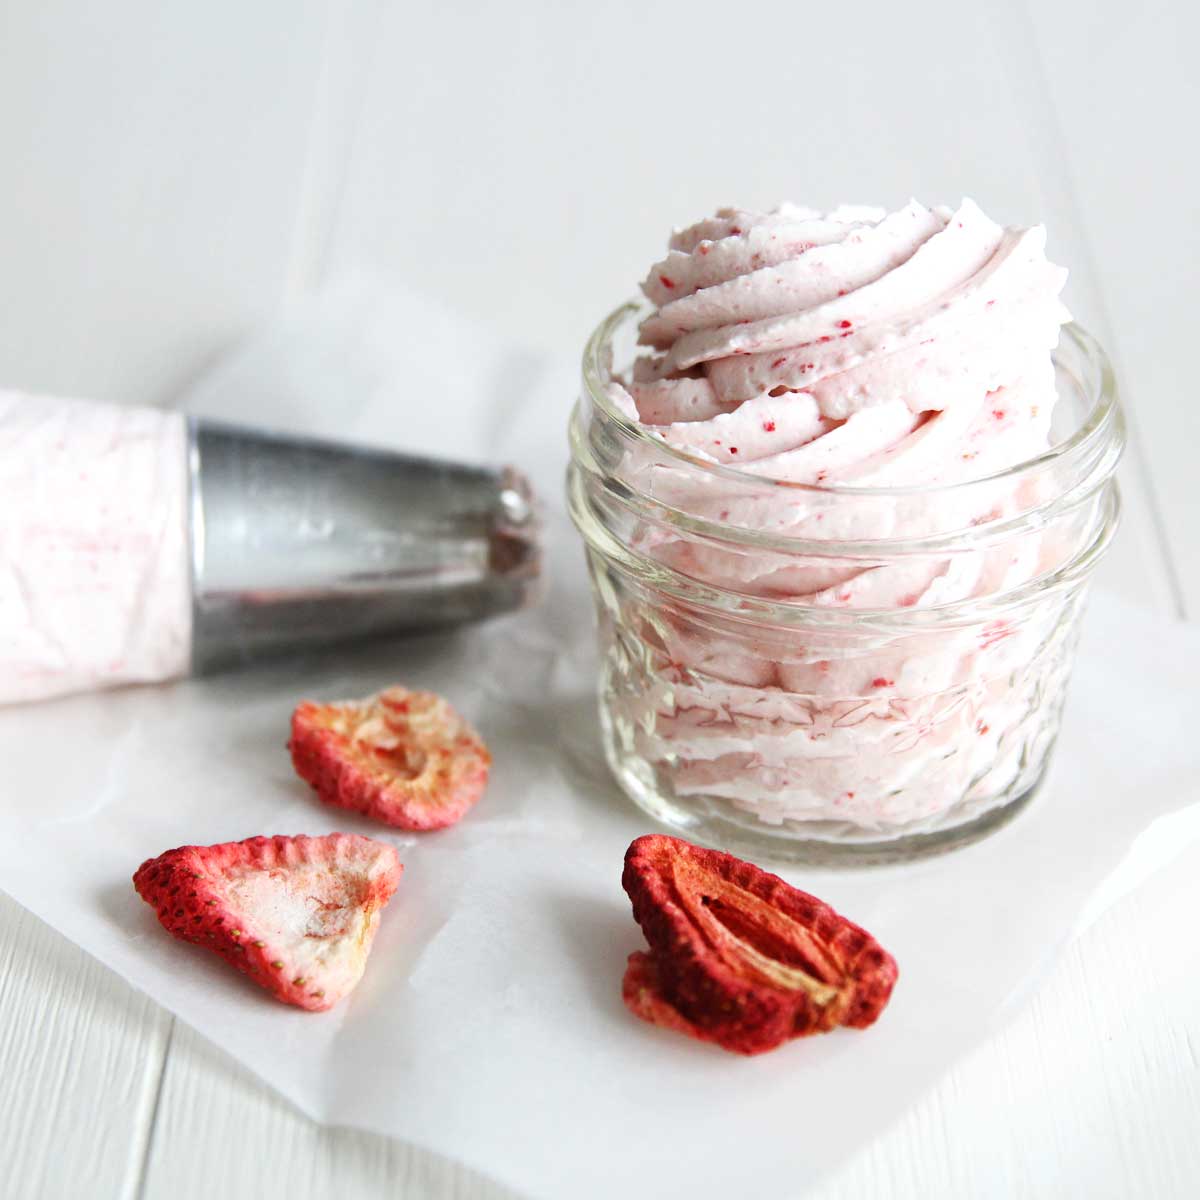 Creamy & Thick Strawberry Cheesecake Whipped Cream (Low-Carb, Keto Recipe) - Peppermint Whipped Cream